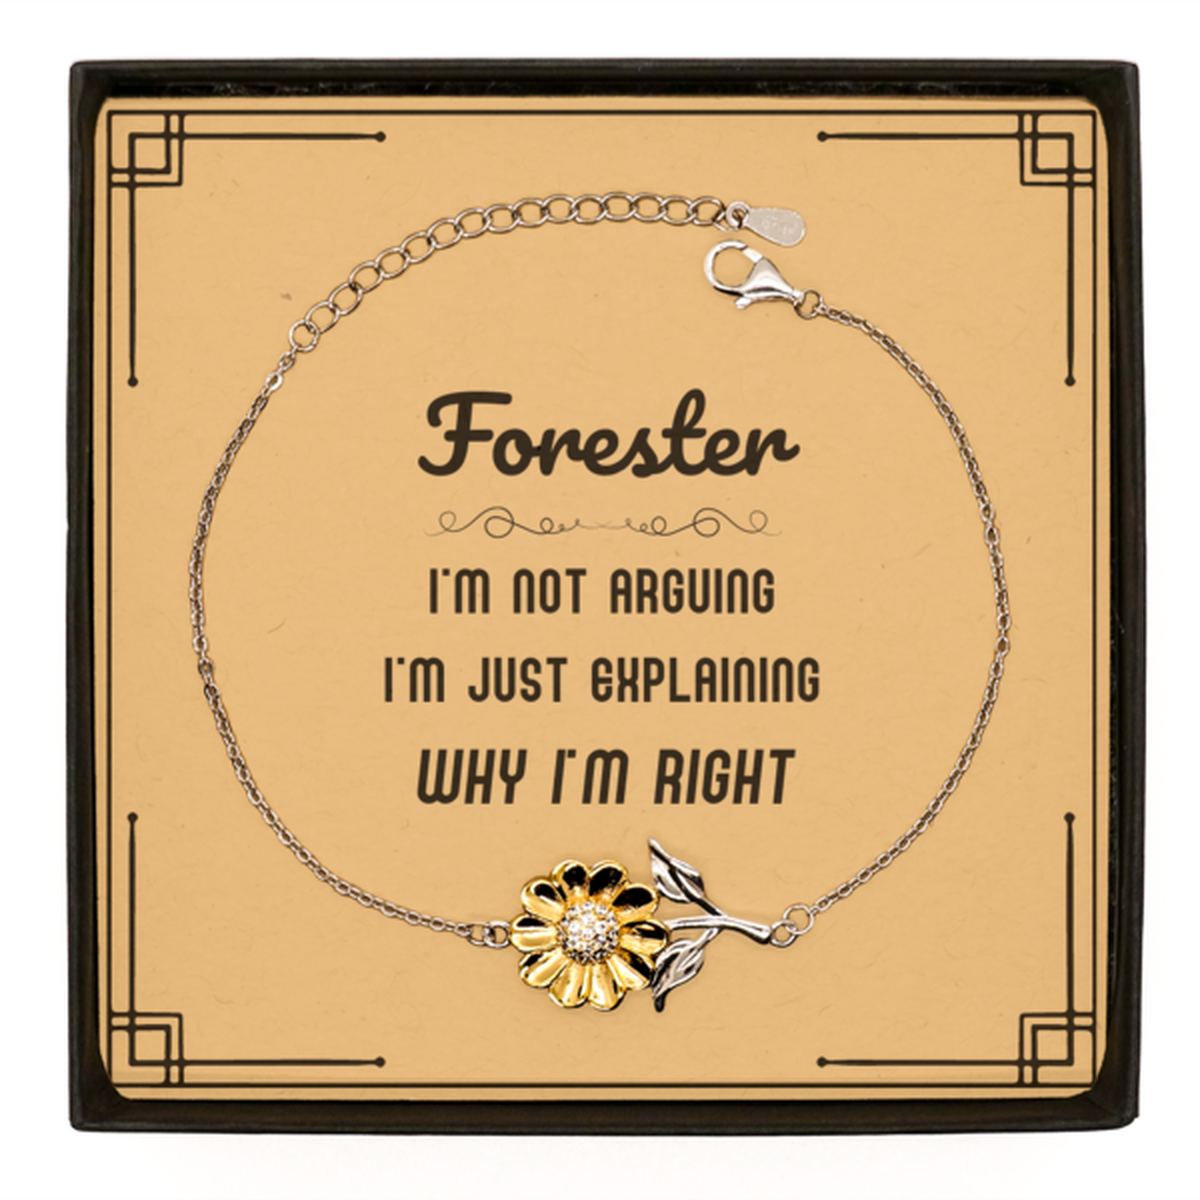 Forester I'm not Arguing. I'm Just Explaining Why I'm RIGHT Sunflower Bracelet, Funny Saying Quote Forester Gifts For Forester Message Card Graduation Birthday Christmas Gifts for Men Women Coworker